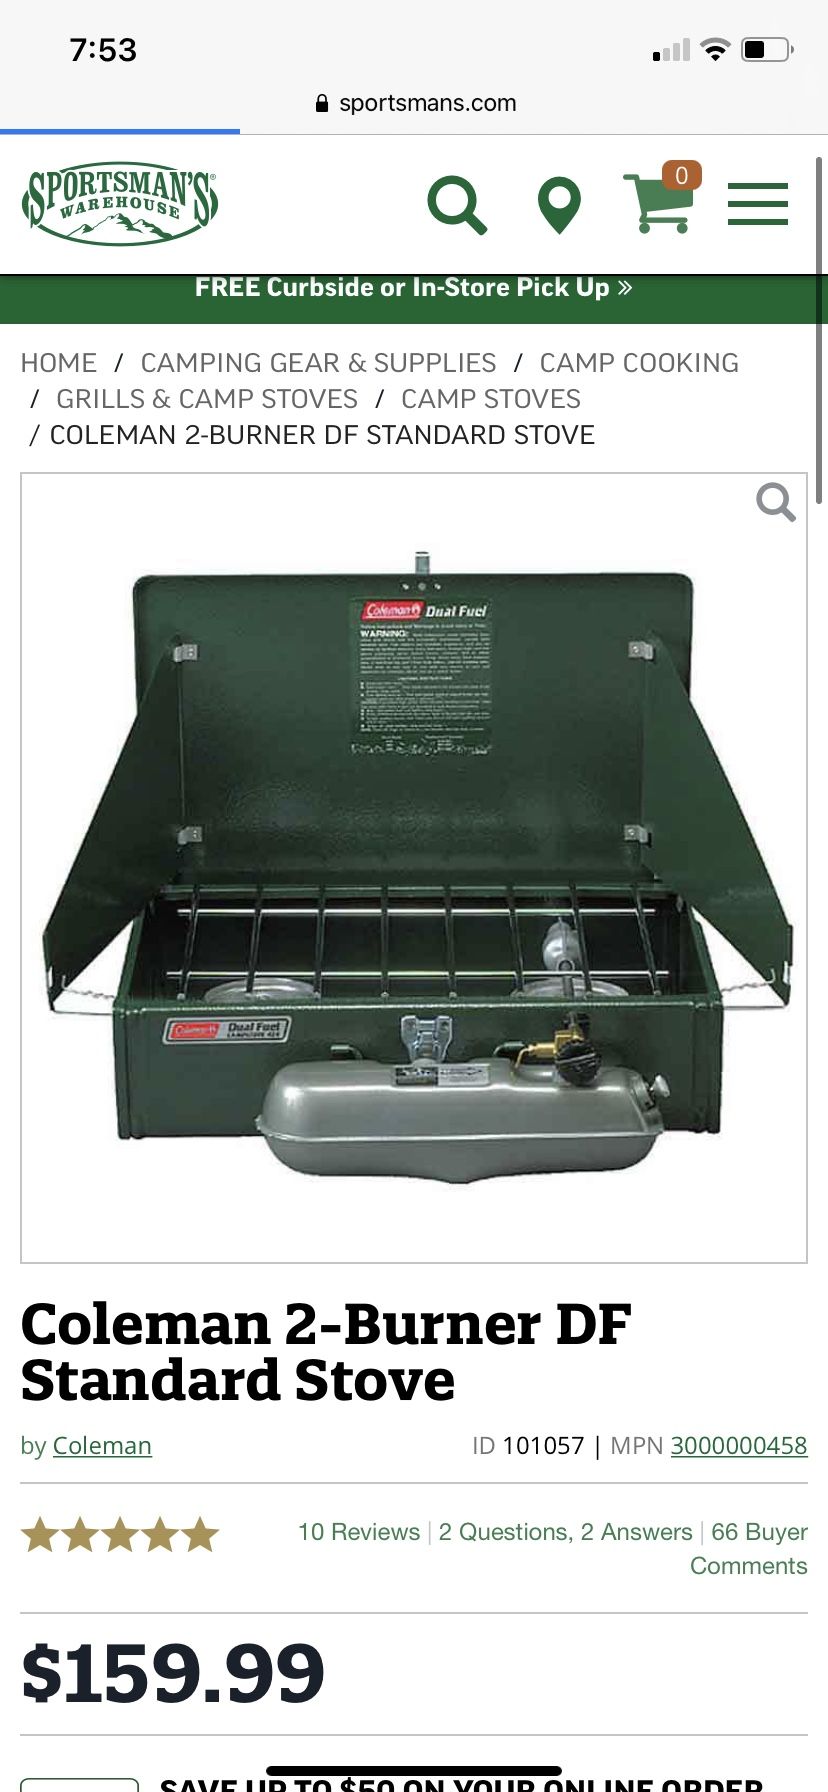 New Coleman Grill